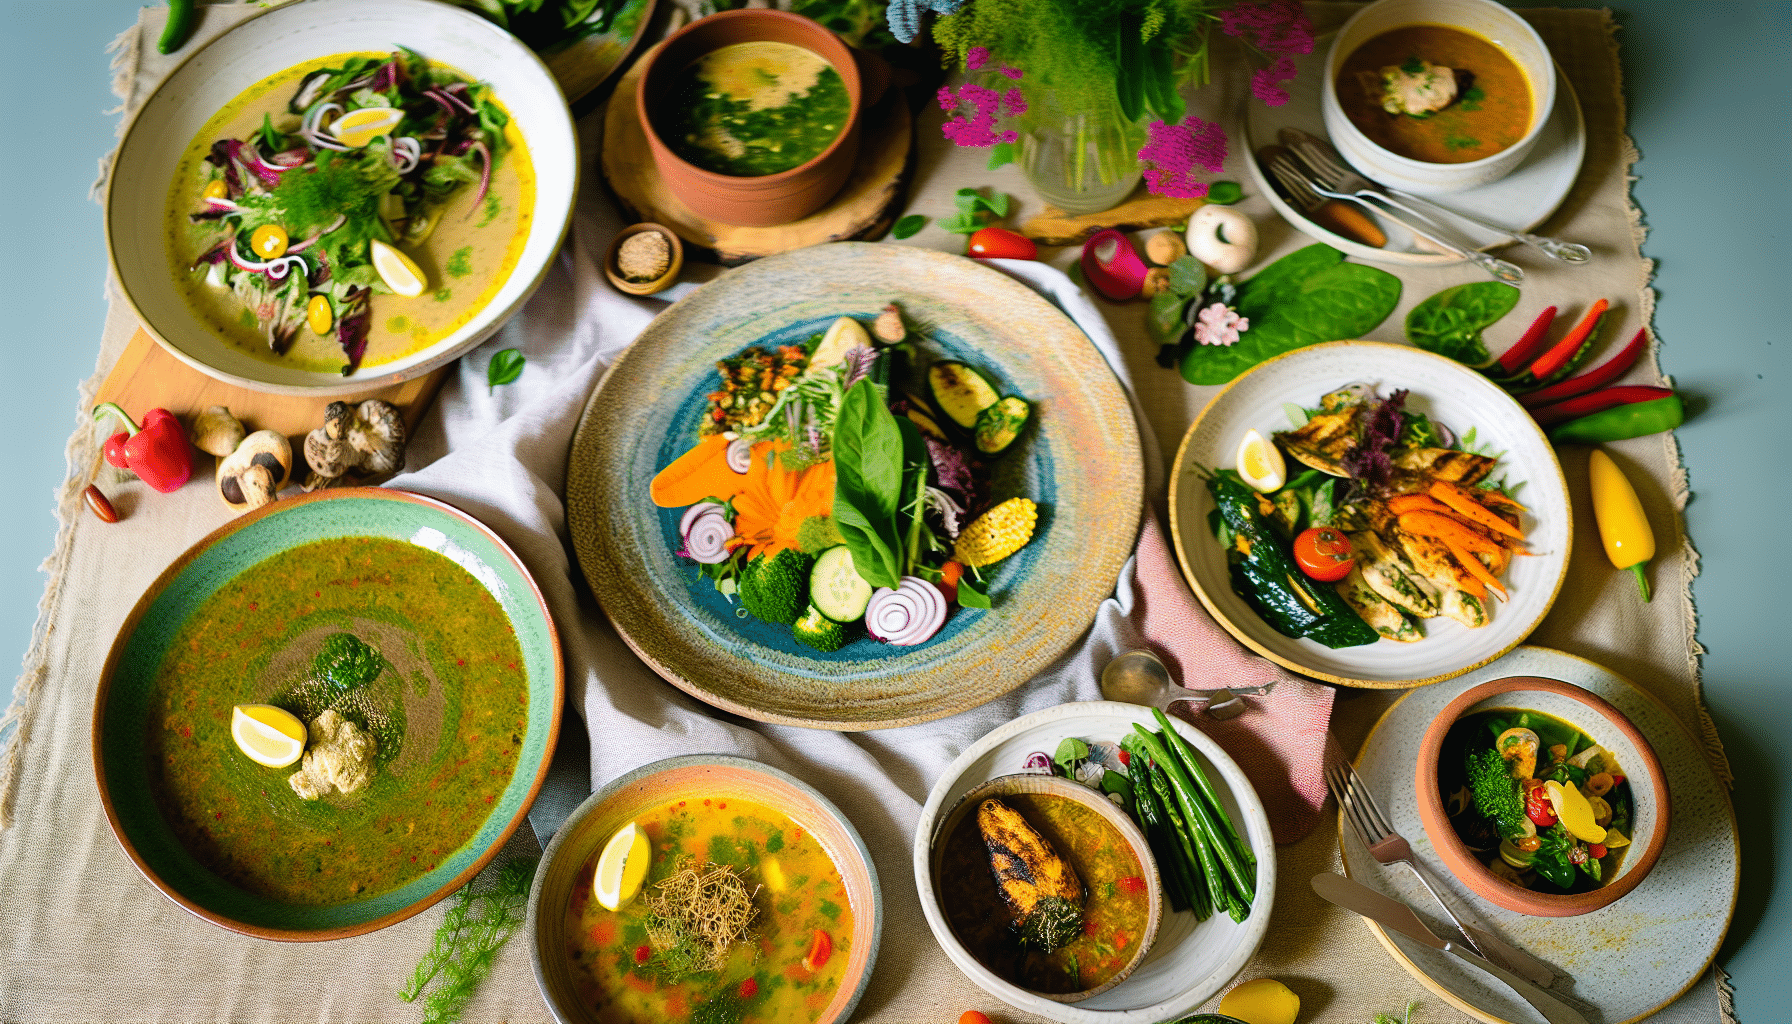 A colorful, nutritious meal spread on a table